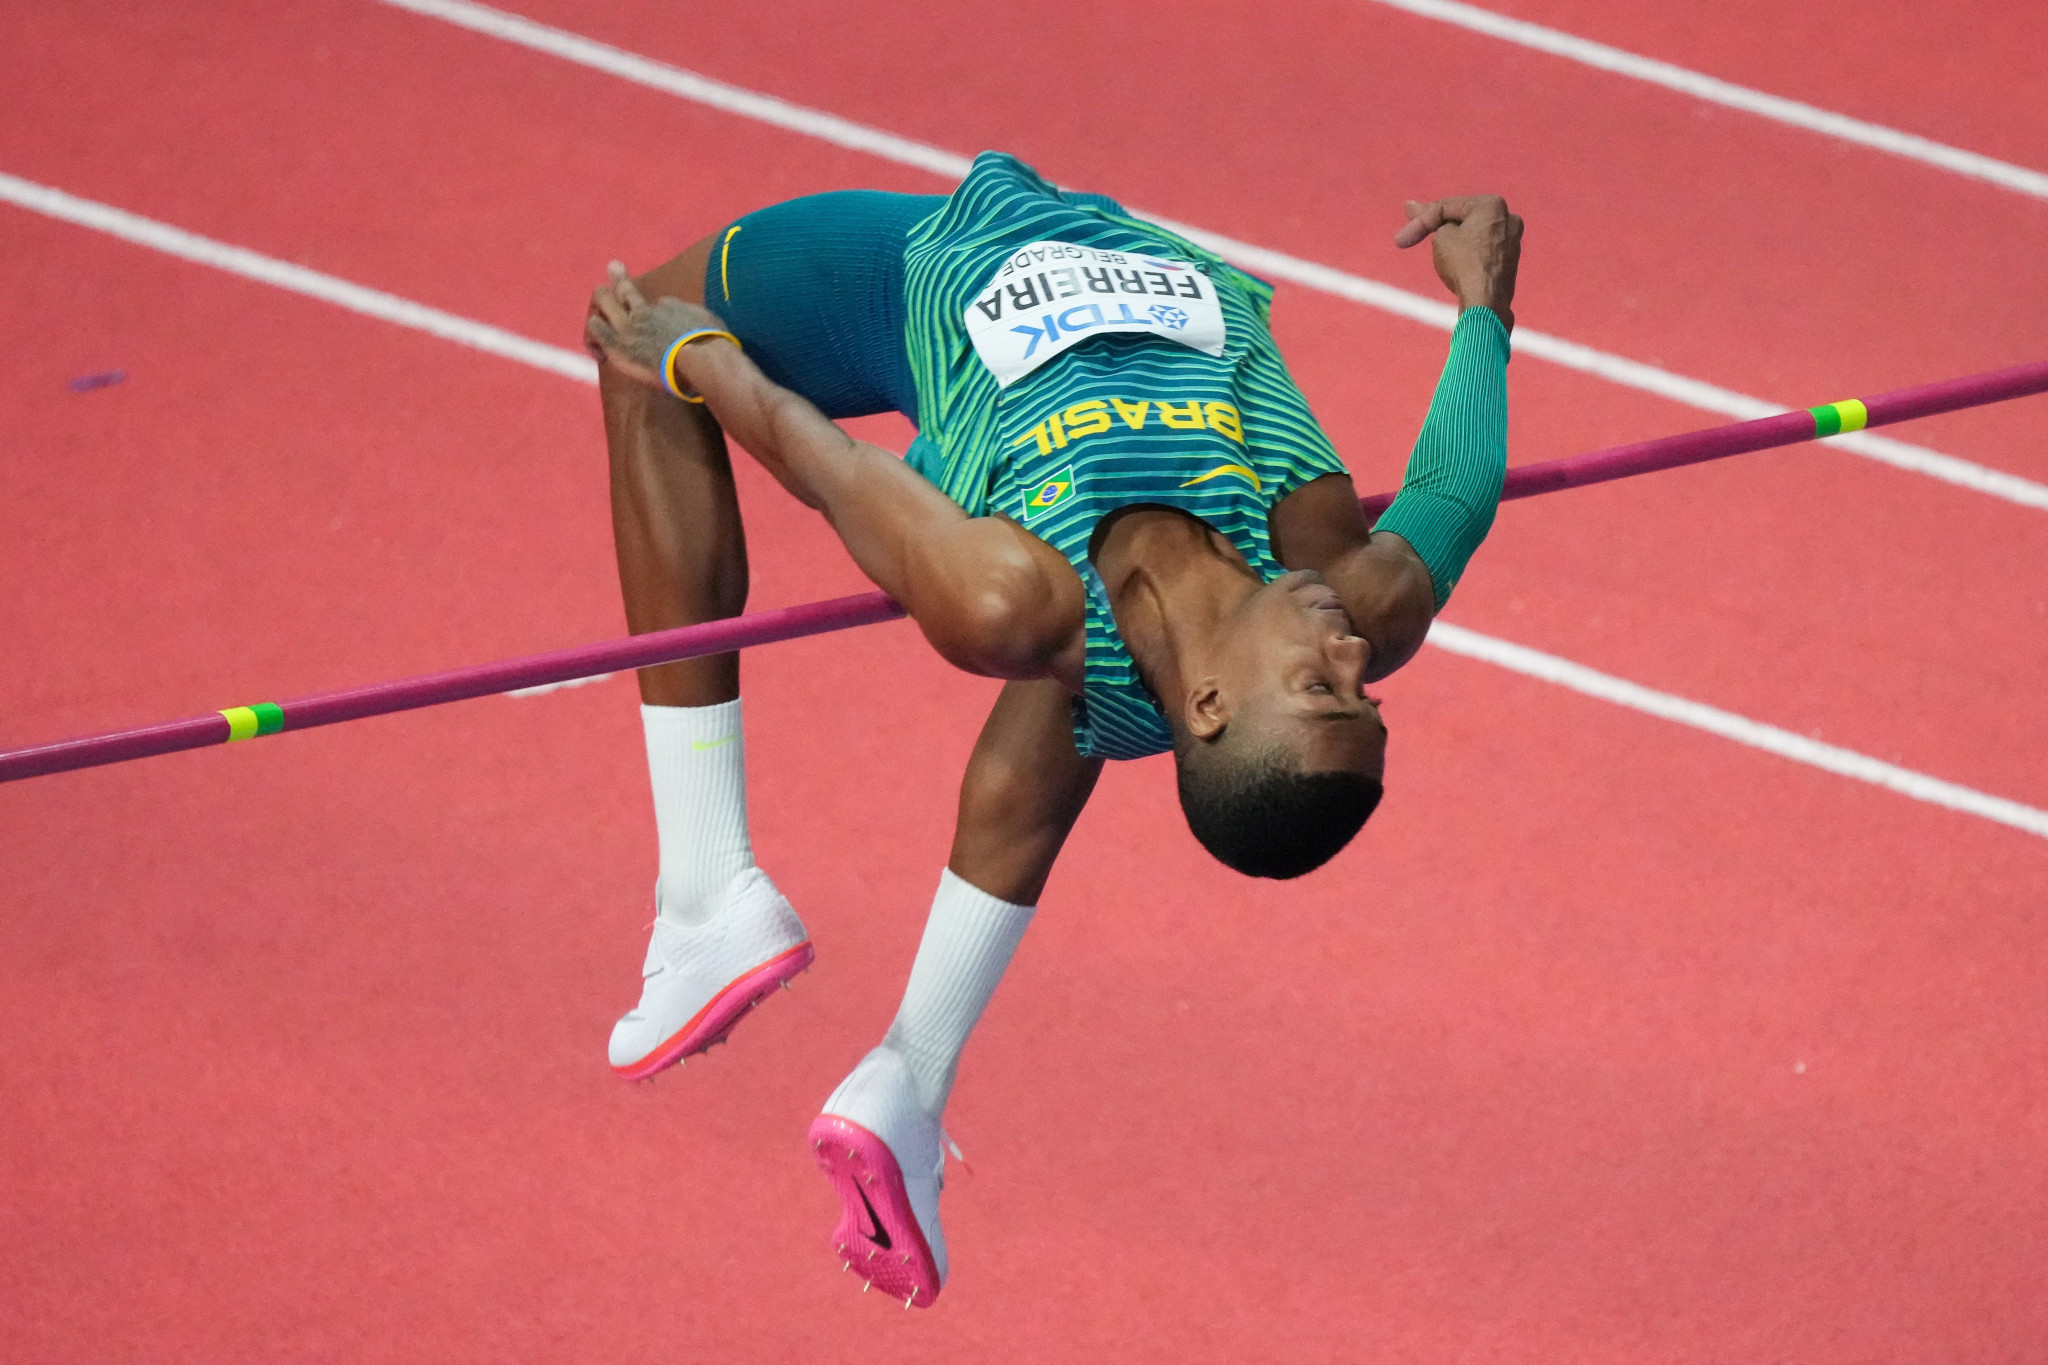 High jump's Ferreira banned for cannabis use but will be free to compete at major 2023 events including Pan American Games